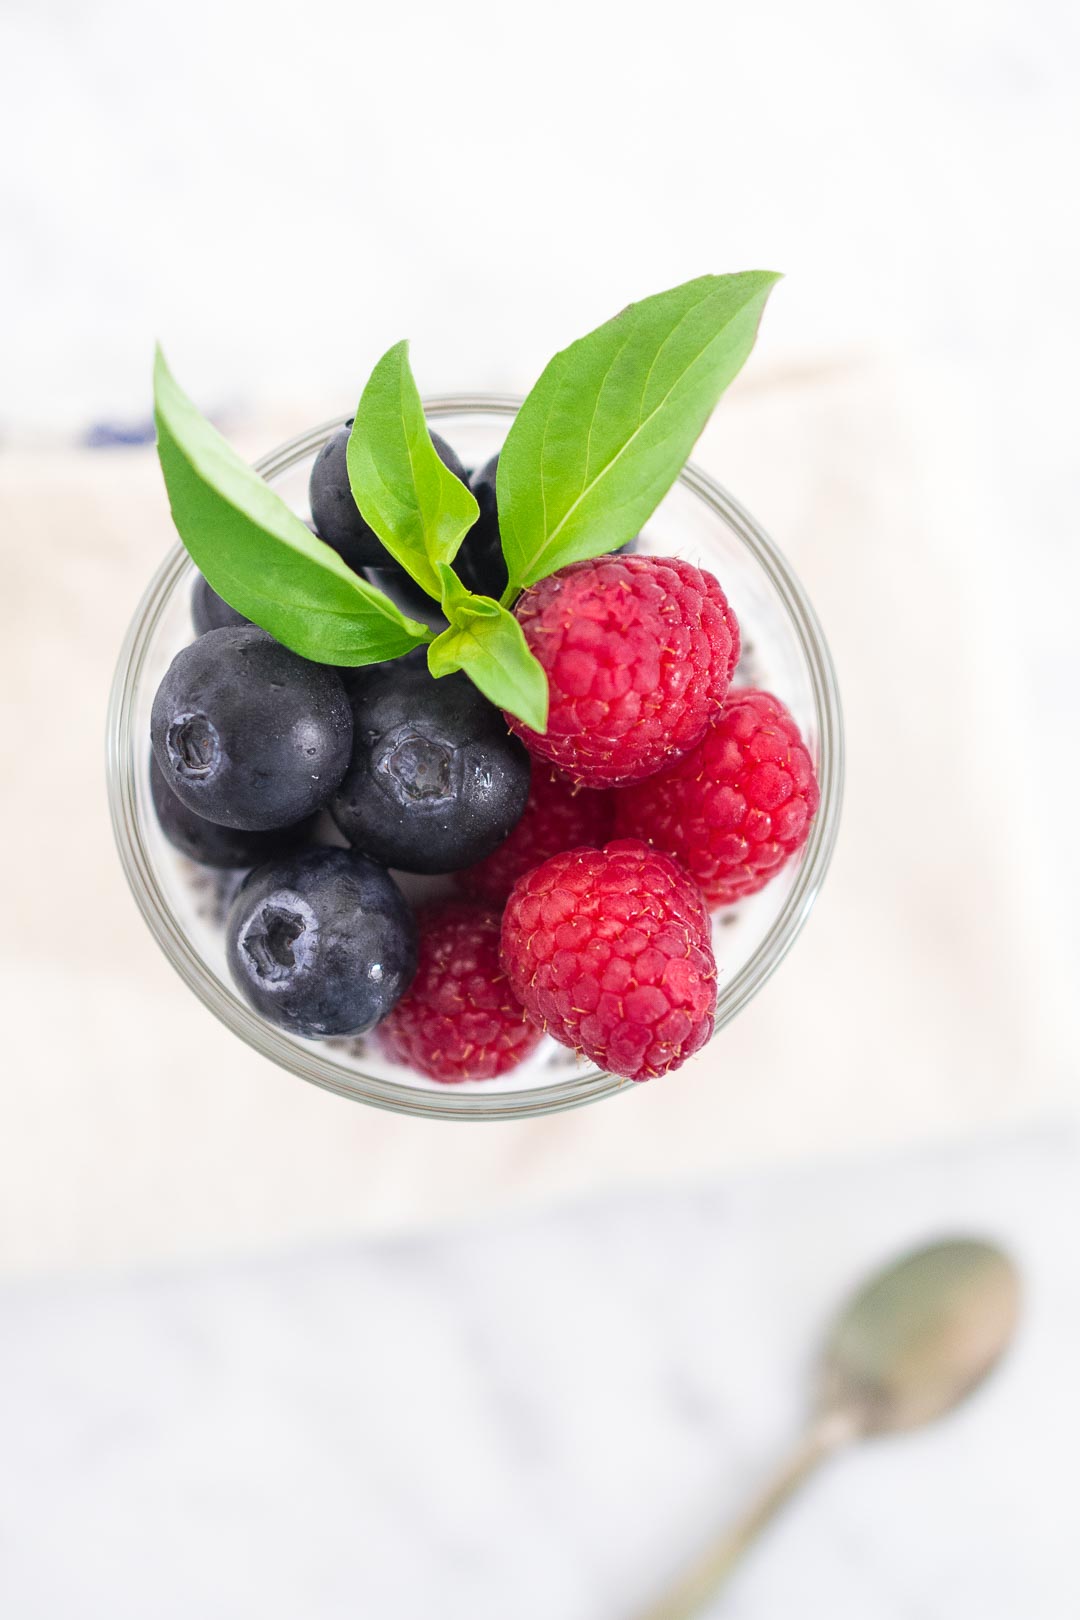 top view of a glass with blueberries and raspberries in it